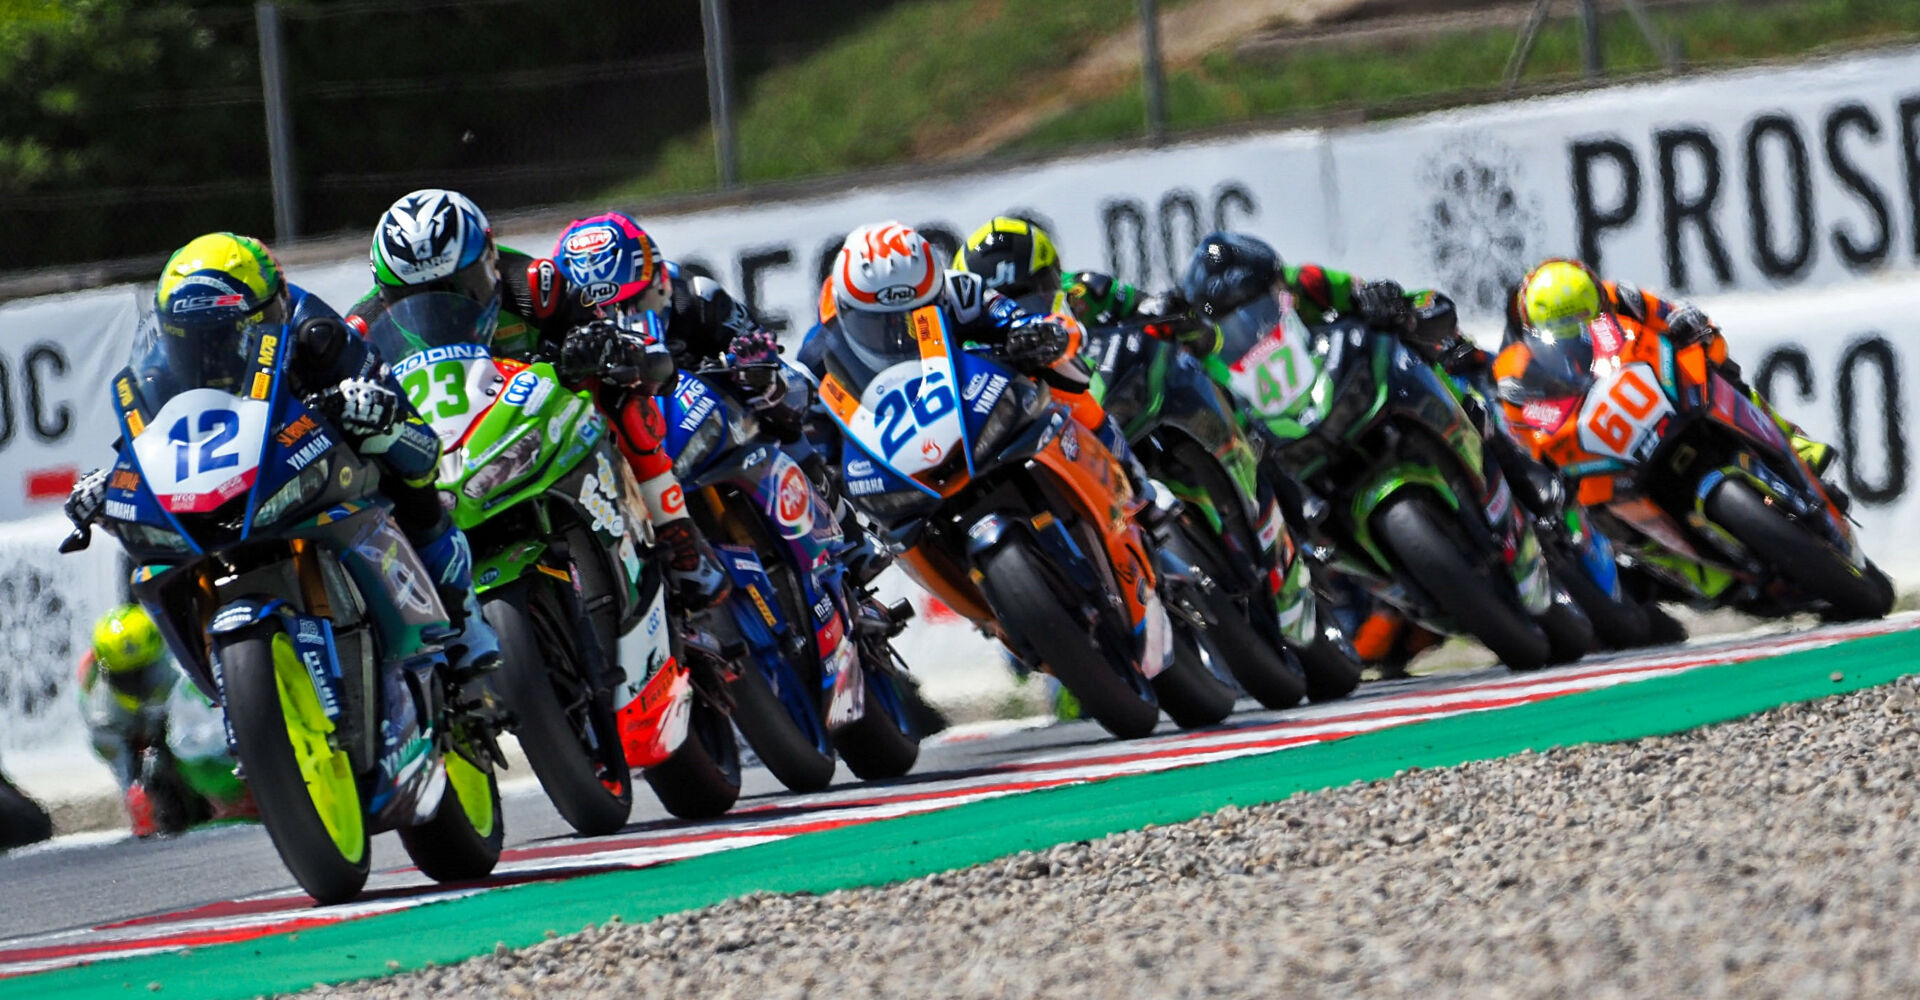 Race officials are trying to crack down on irresponsible riding in the Supersport300 World Championship class. Photo courtesy Dorna.